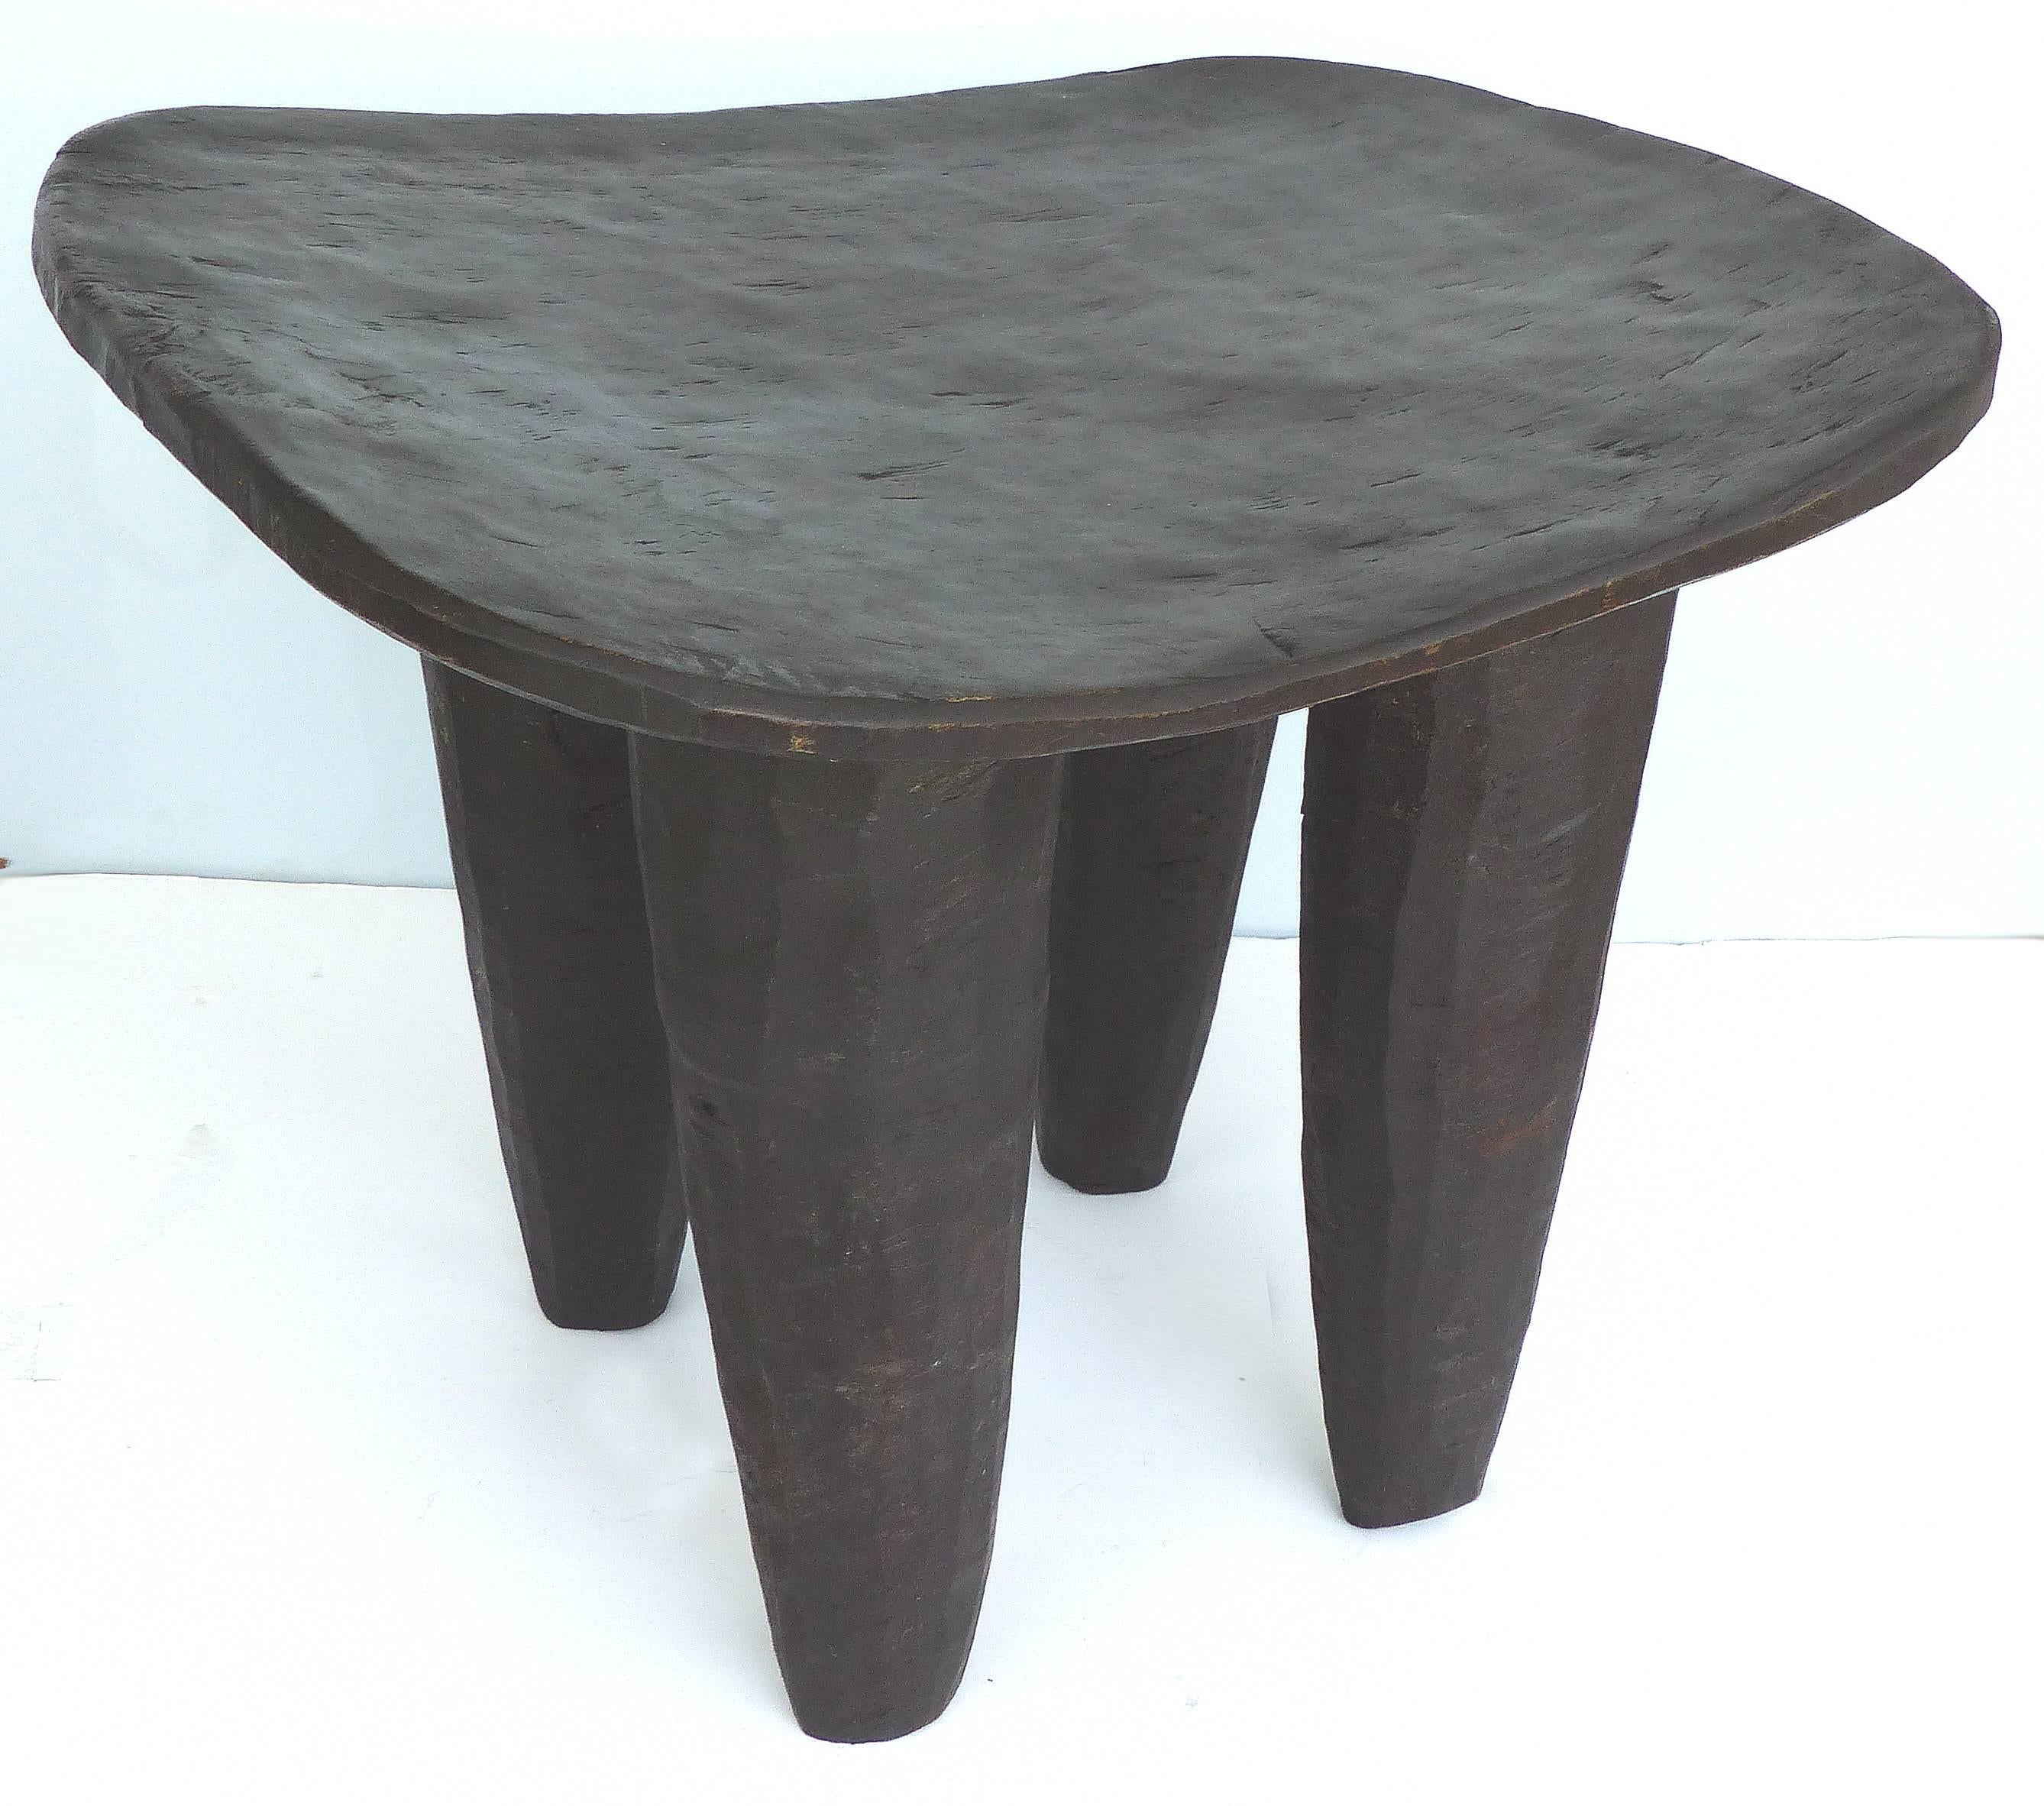 Offered for sale is a 20th century hand-carved Senufo stool from the Cote d'Ivoire. The chair is very stable and quite sensual. The wood shows lovely rustic textures of the hand carving. It makes a wonderful side table or stool. Height is measured